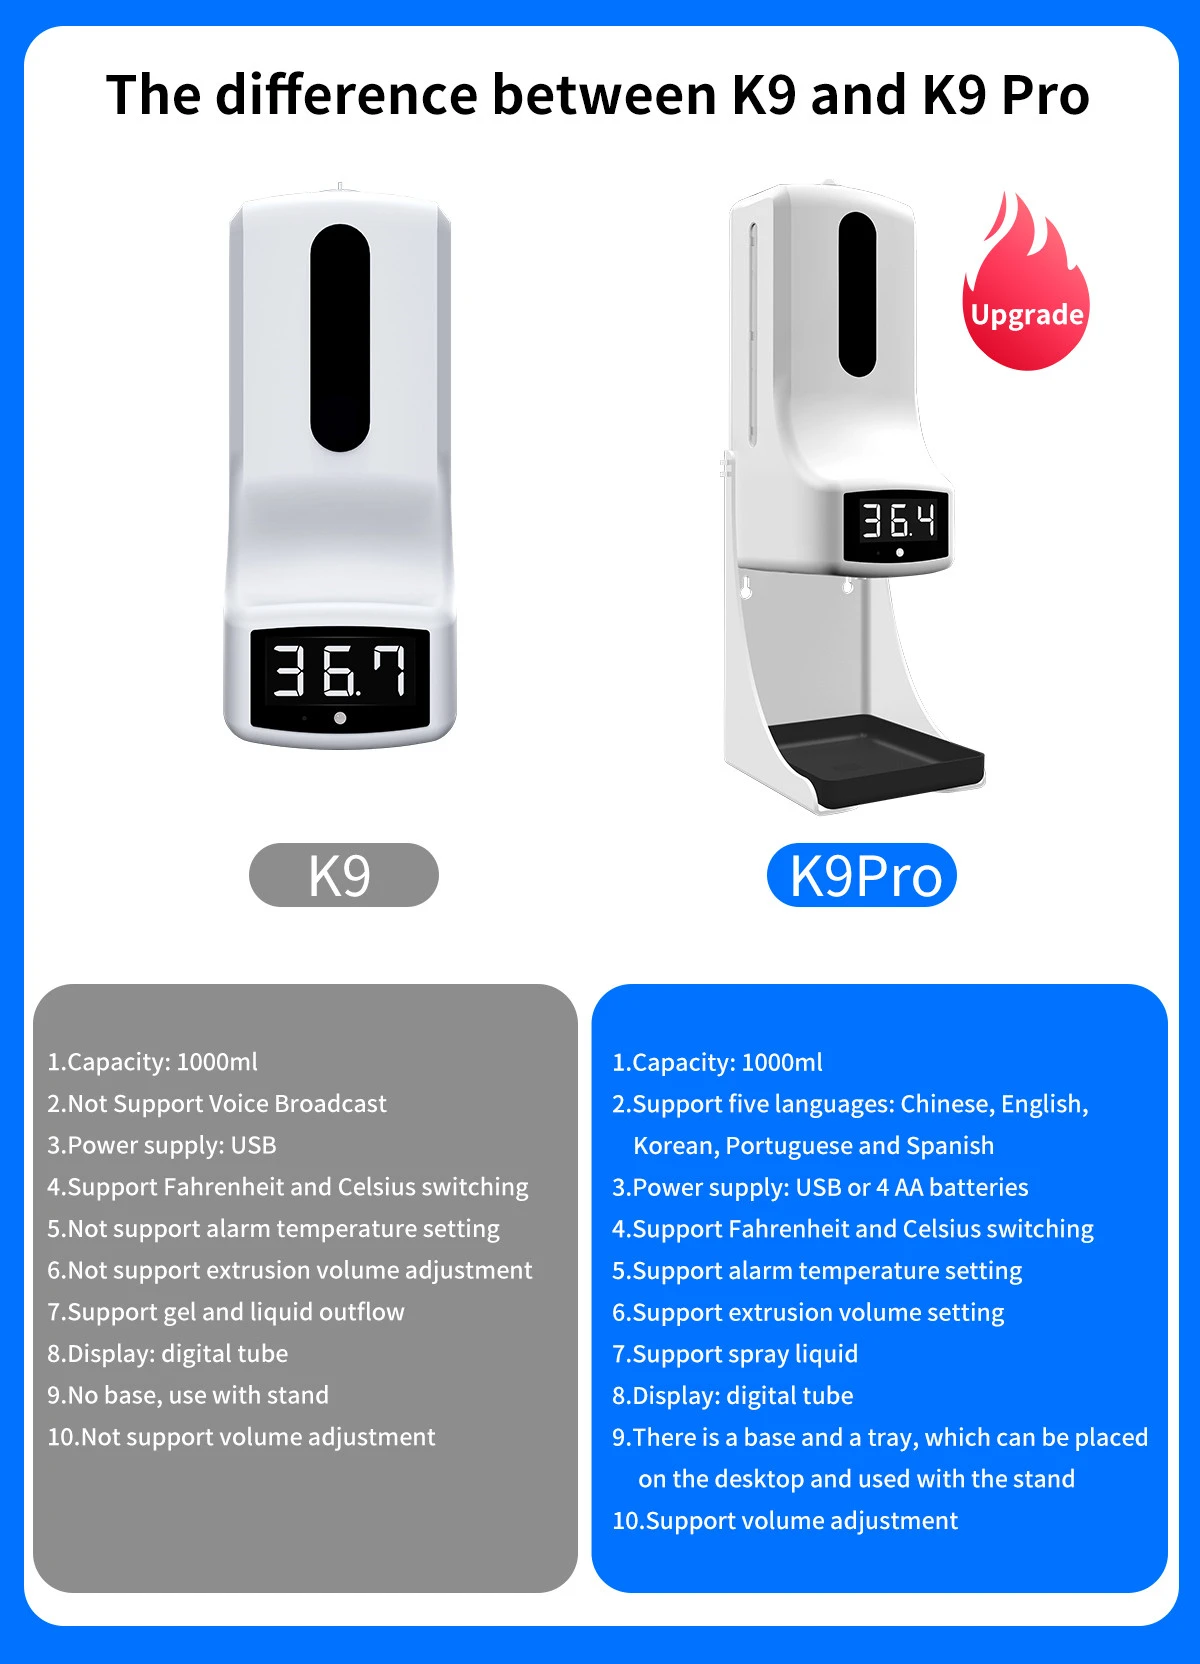 China manufacturers price k9 pro thermometer soap dispenser easy install automatic hand sanitizing dispenser thermometer